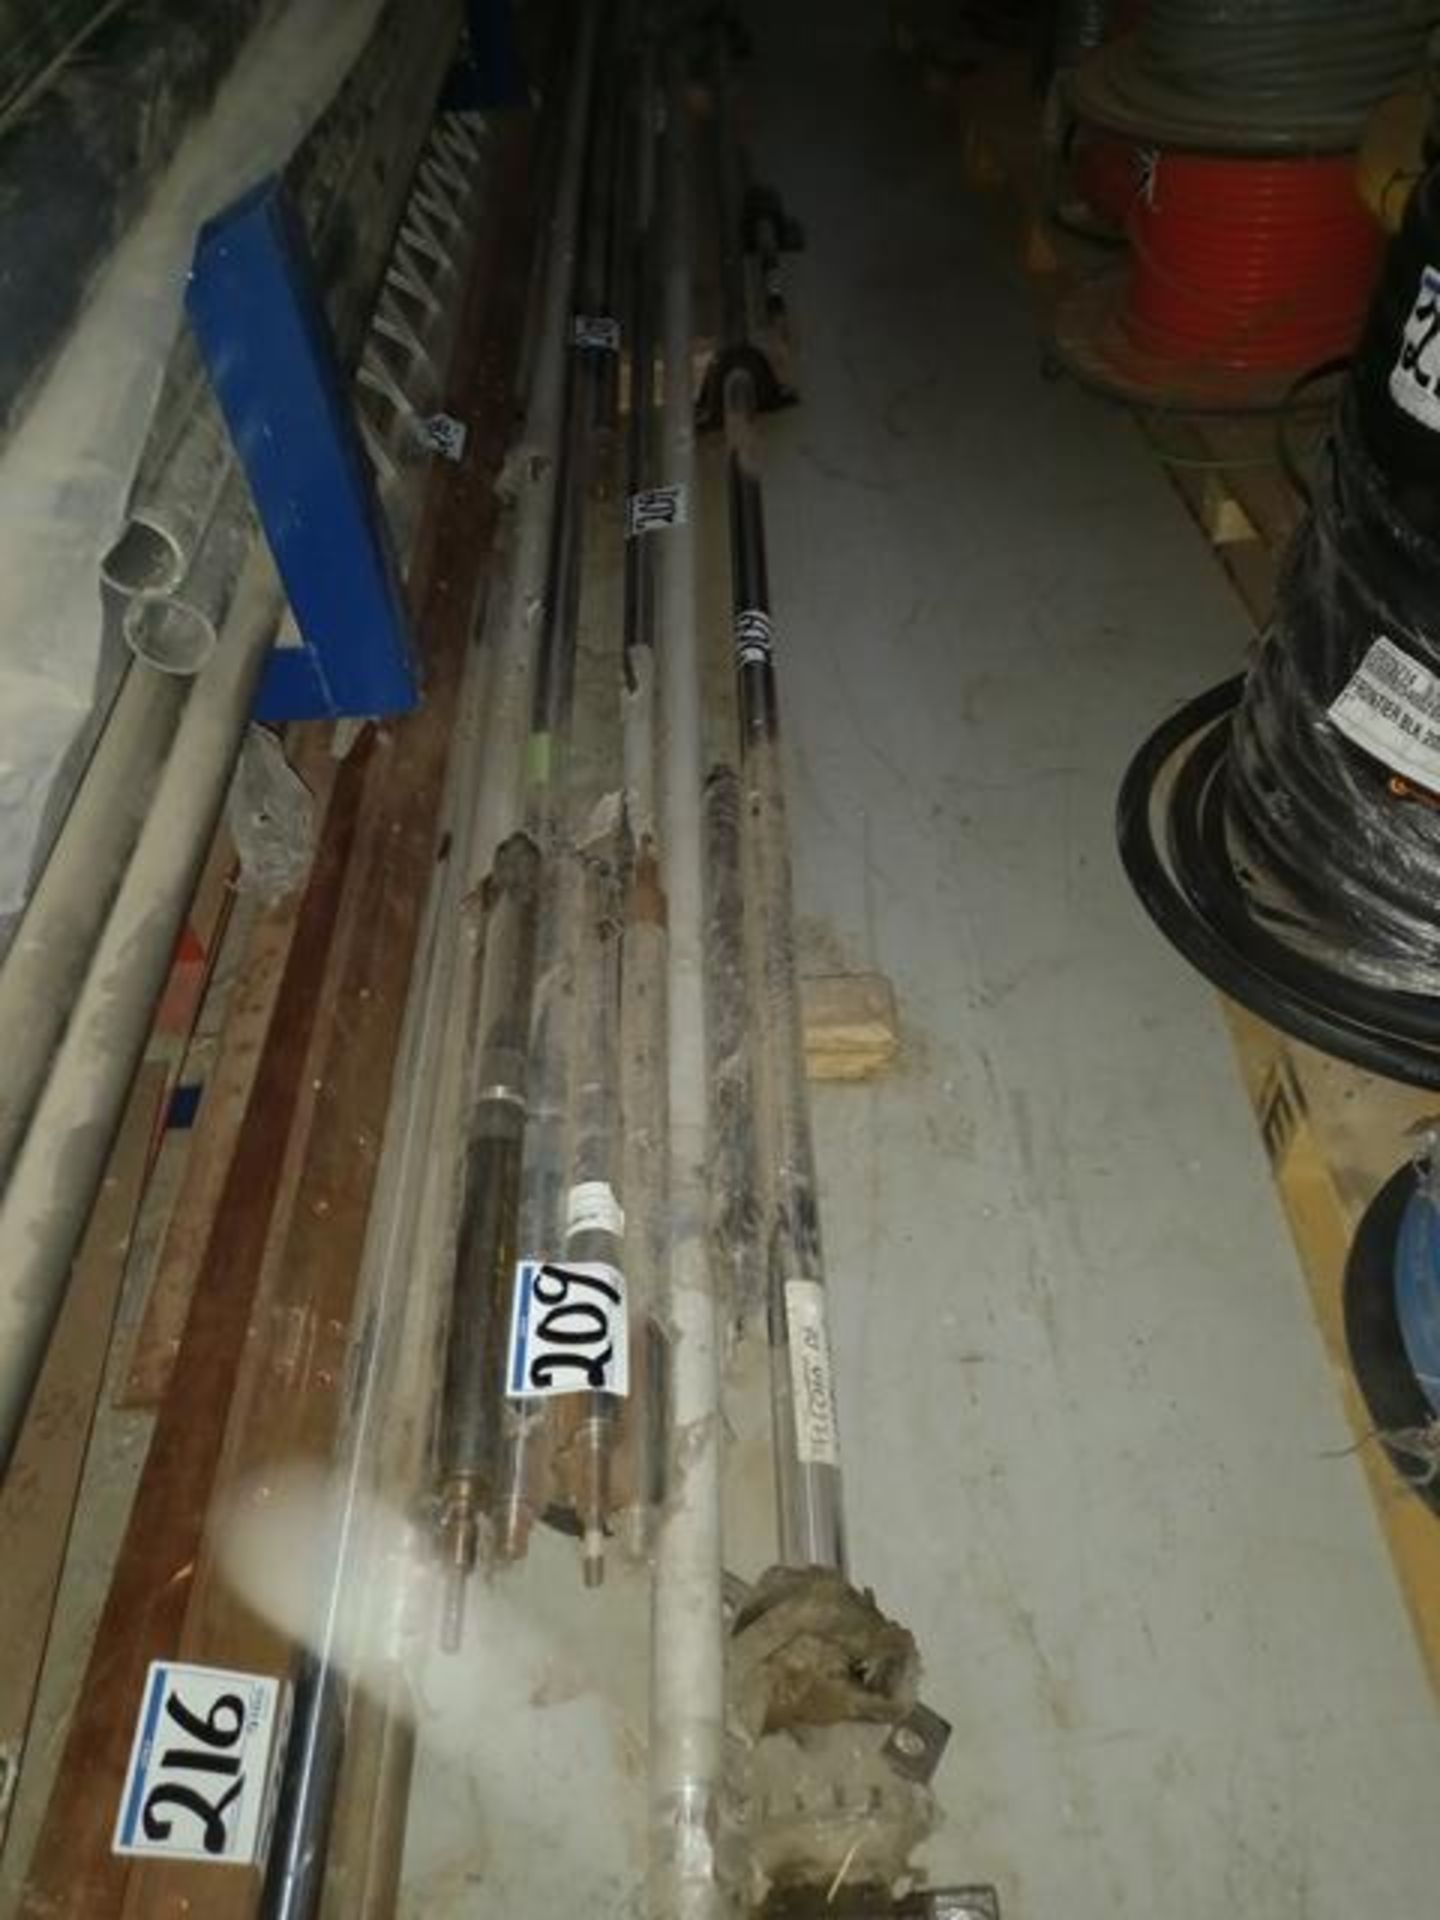 Lot Consisting of: (9) Inch Roll Bars, 2 Inch X 28 (8) Roll Bars Different Sizes